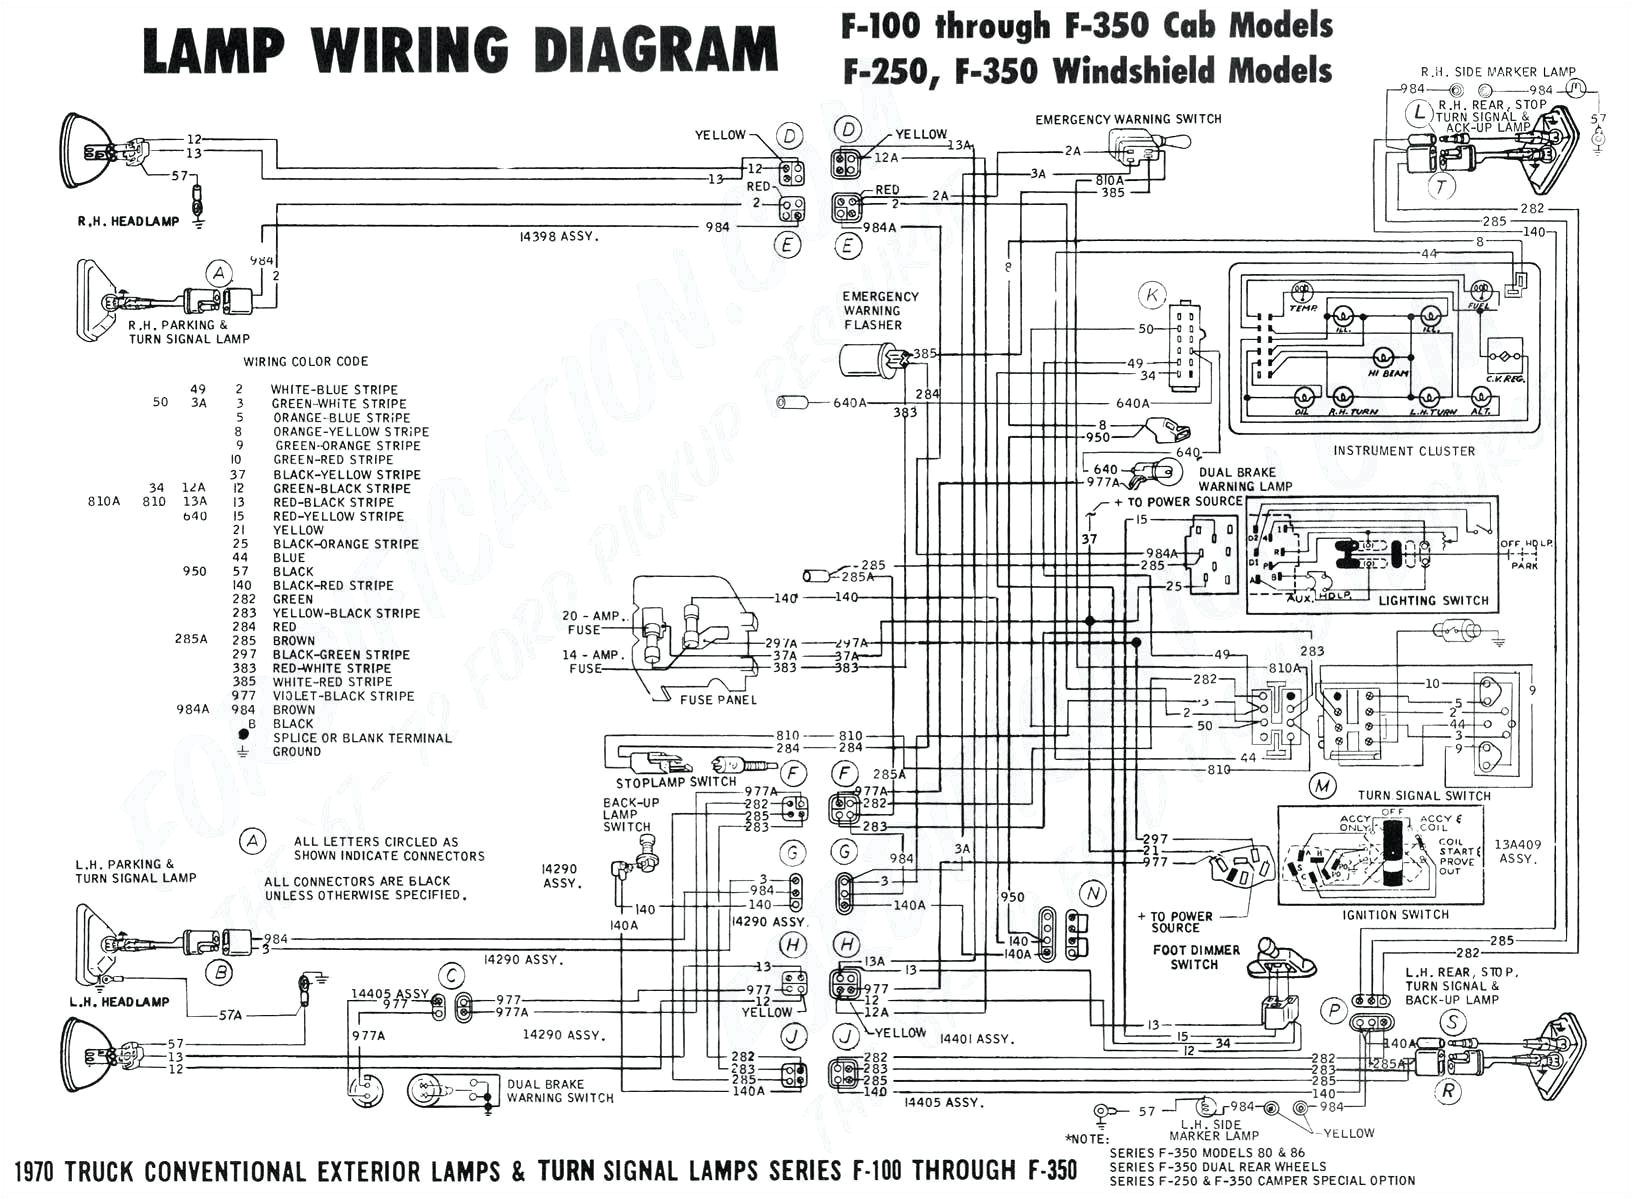 wiring diagram for 2001 ford f250 wiring diagrams konsult top hat trailers wire schematic